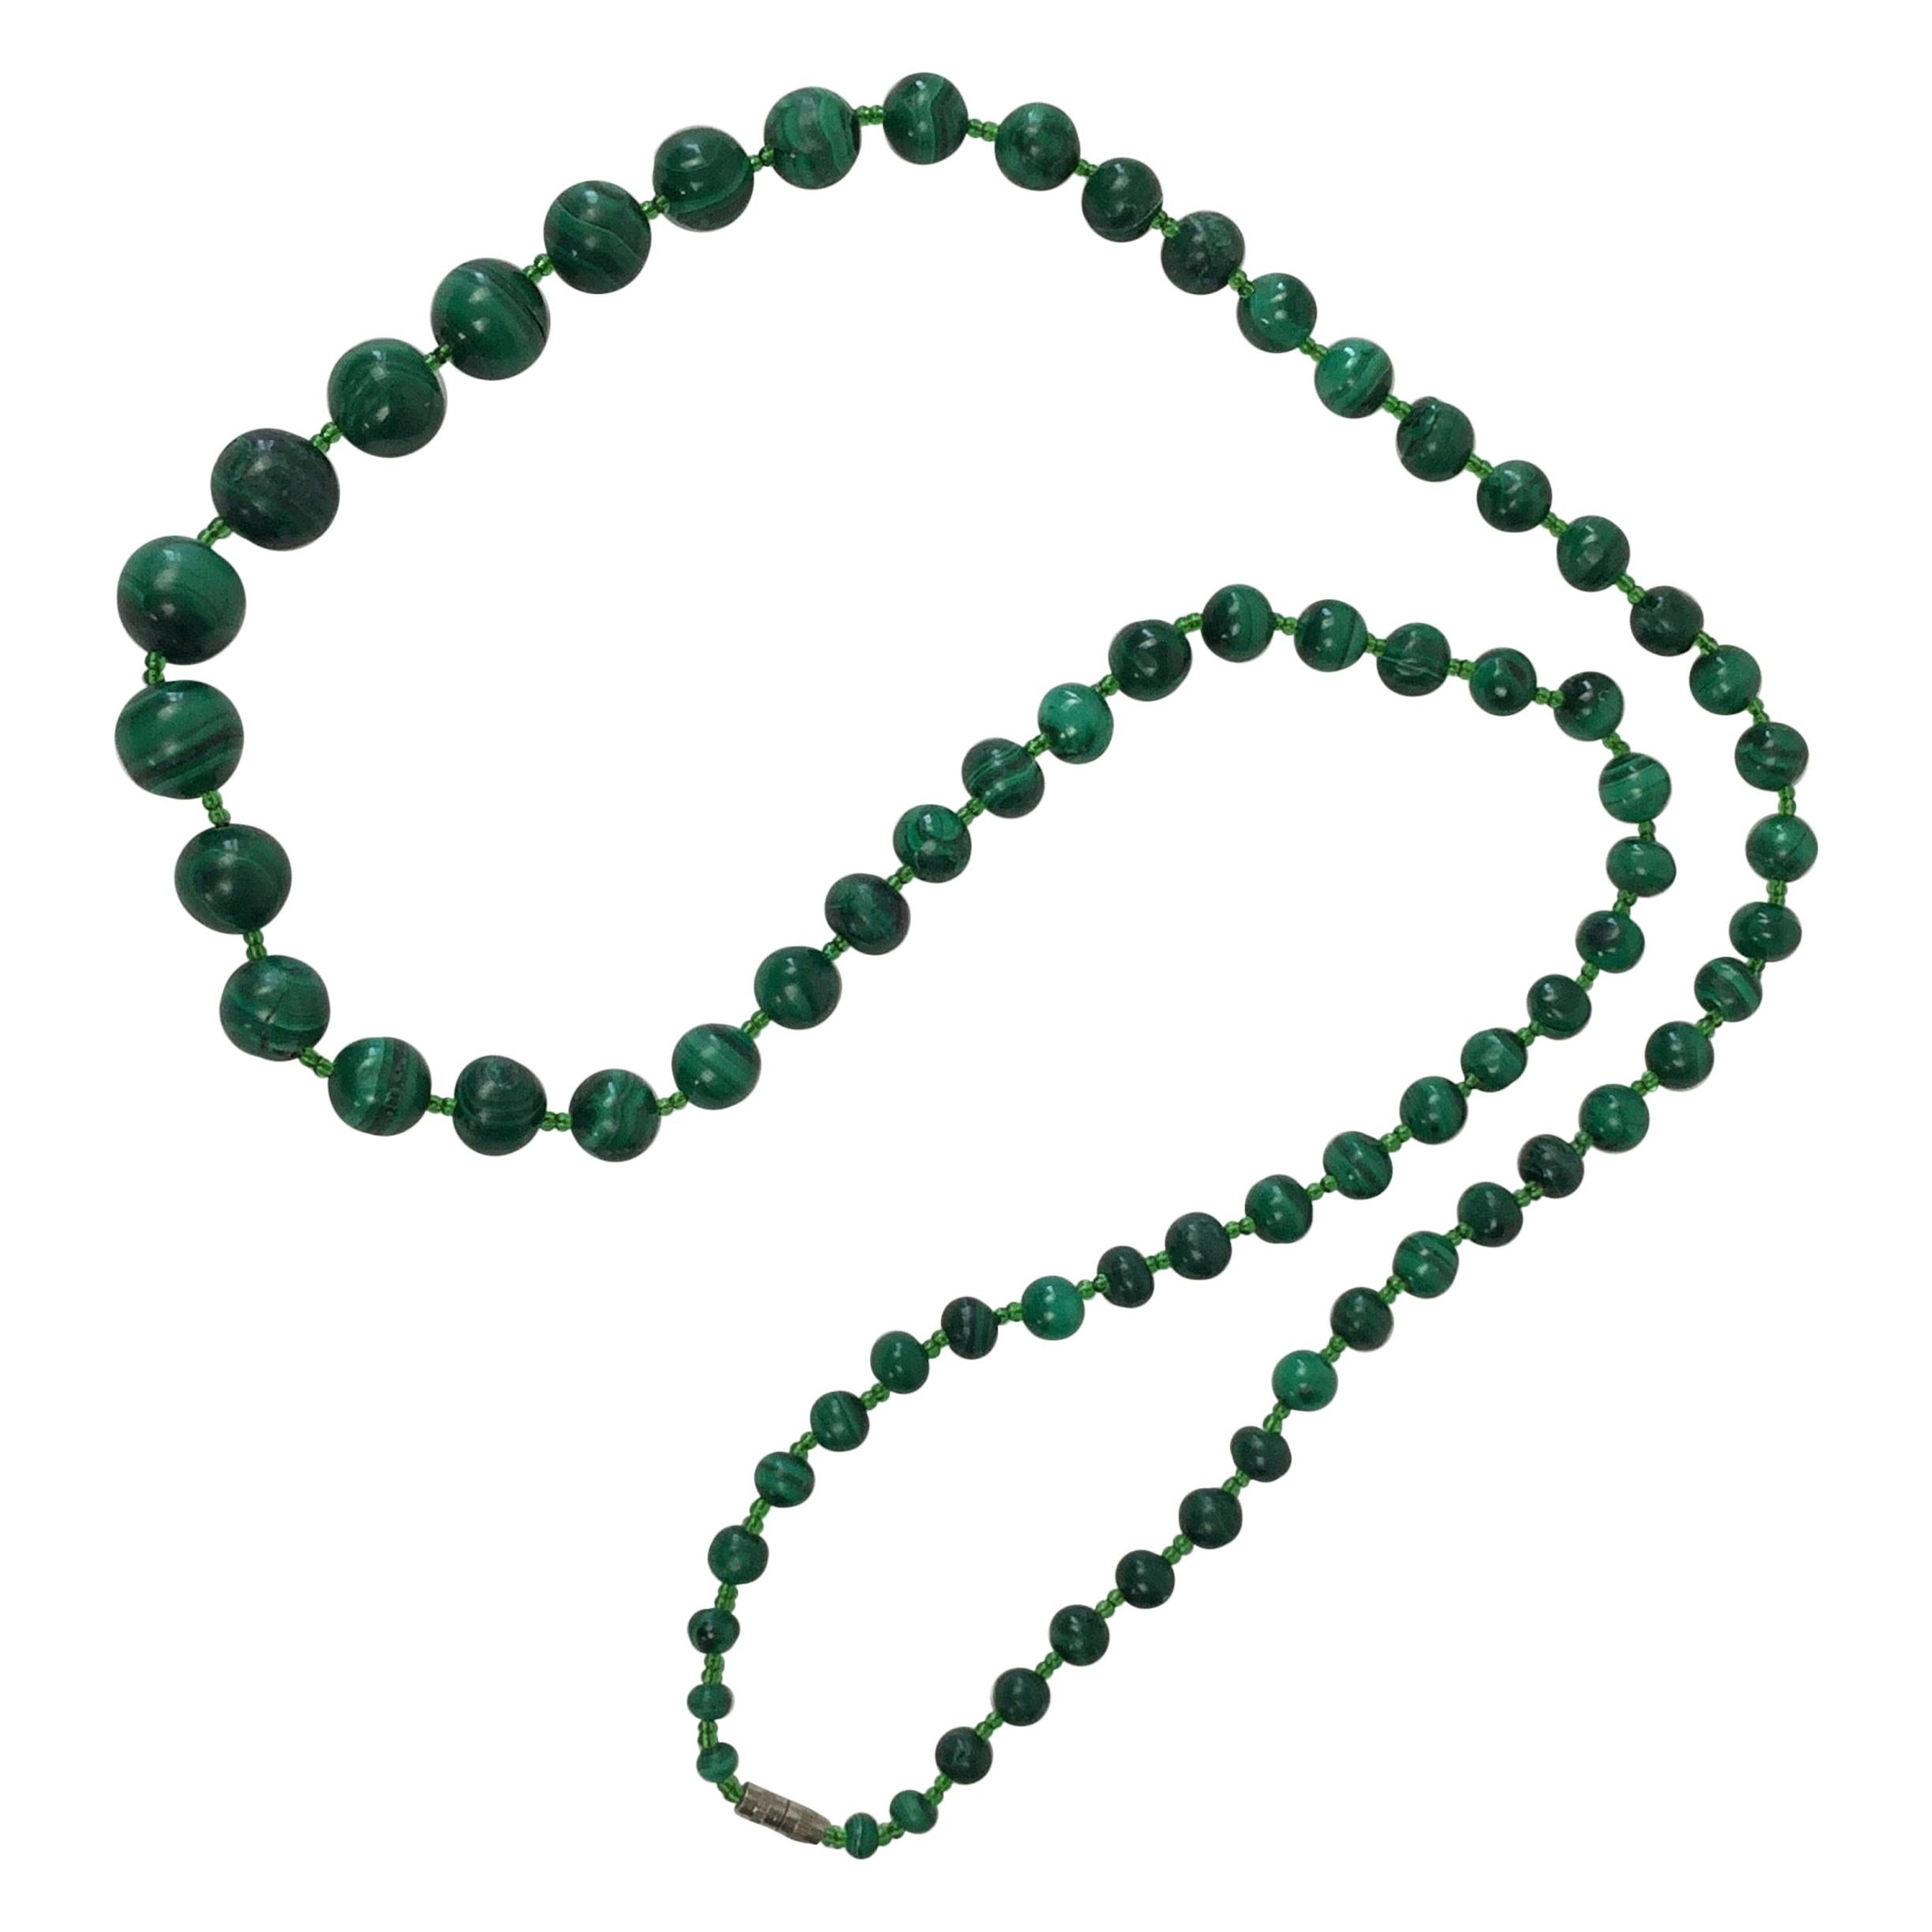 Polished Malachite and Glass Necklace For Sale